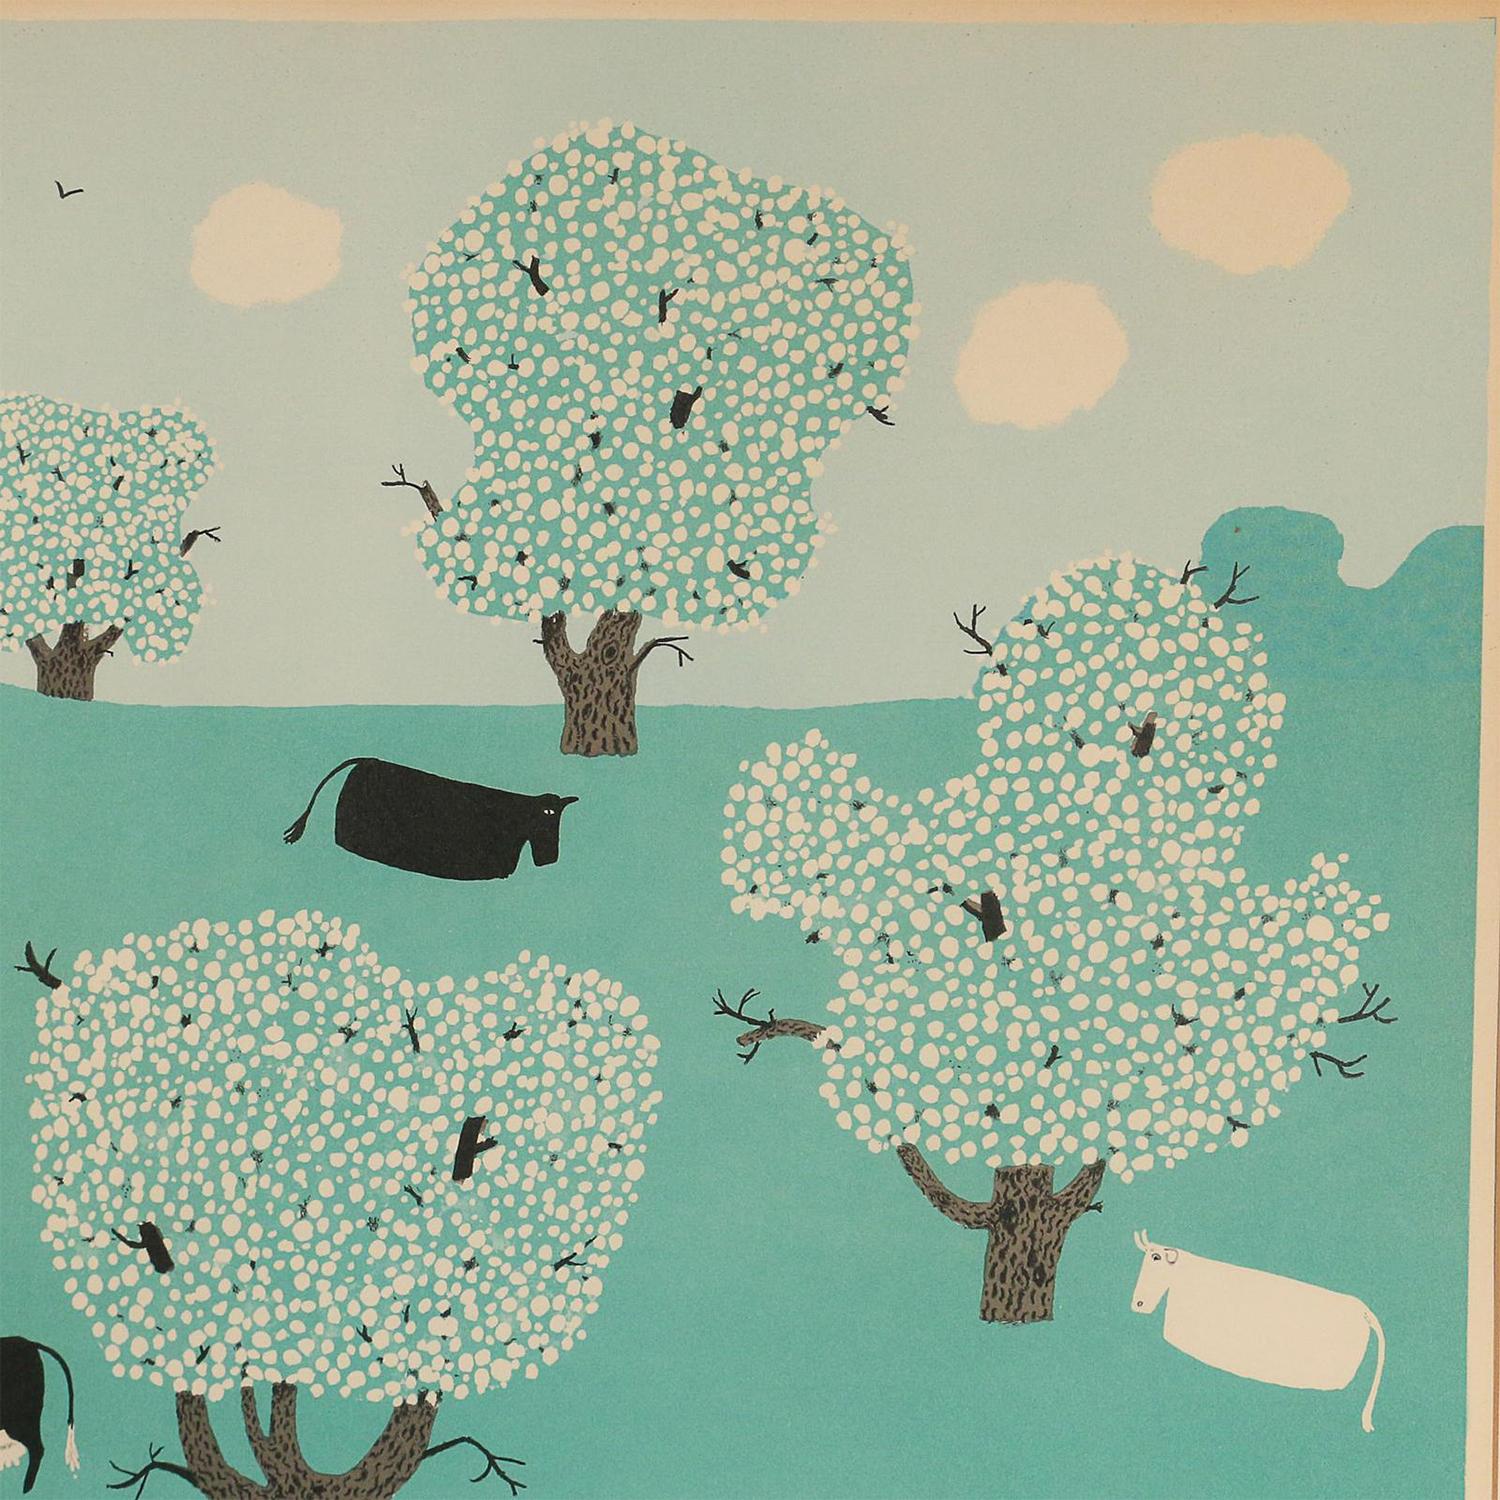 Folk Art 20th Century American Landscape Color Lithography, Blossom Time by Doris Lee